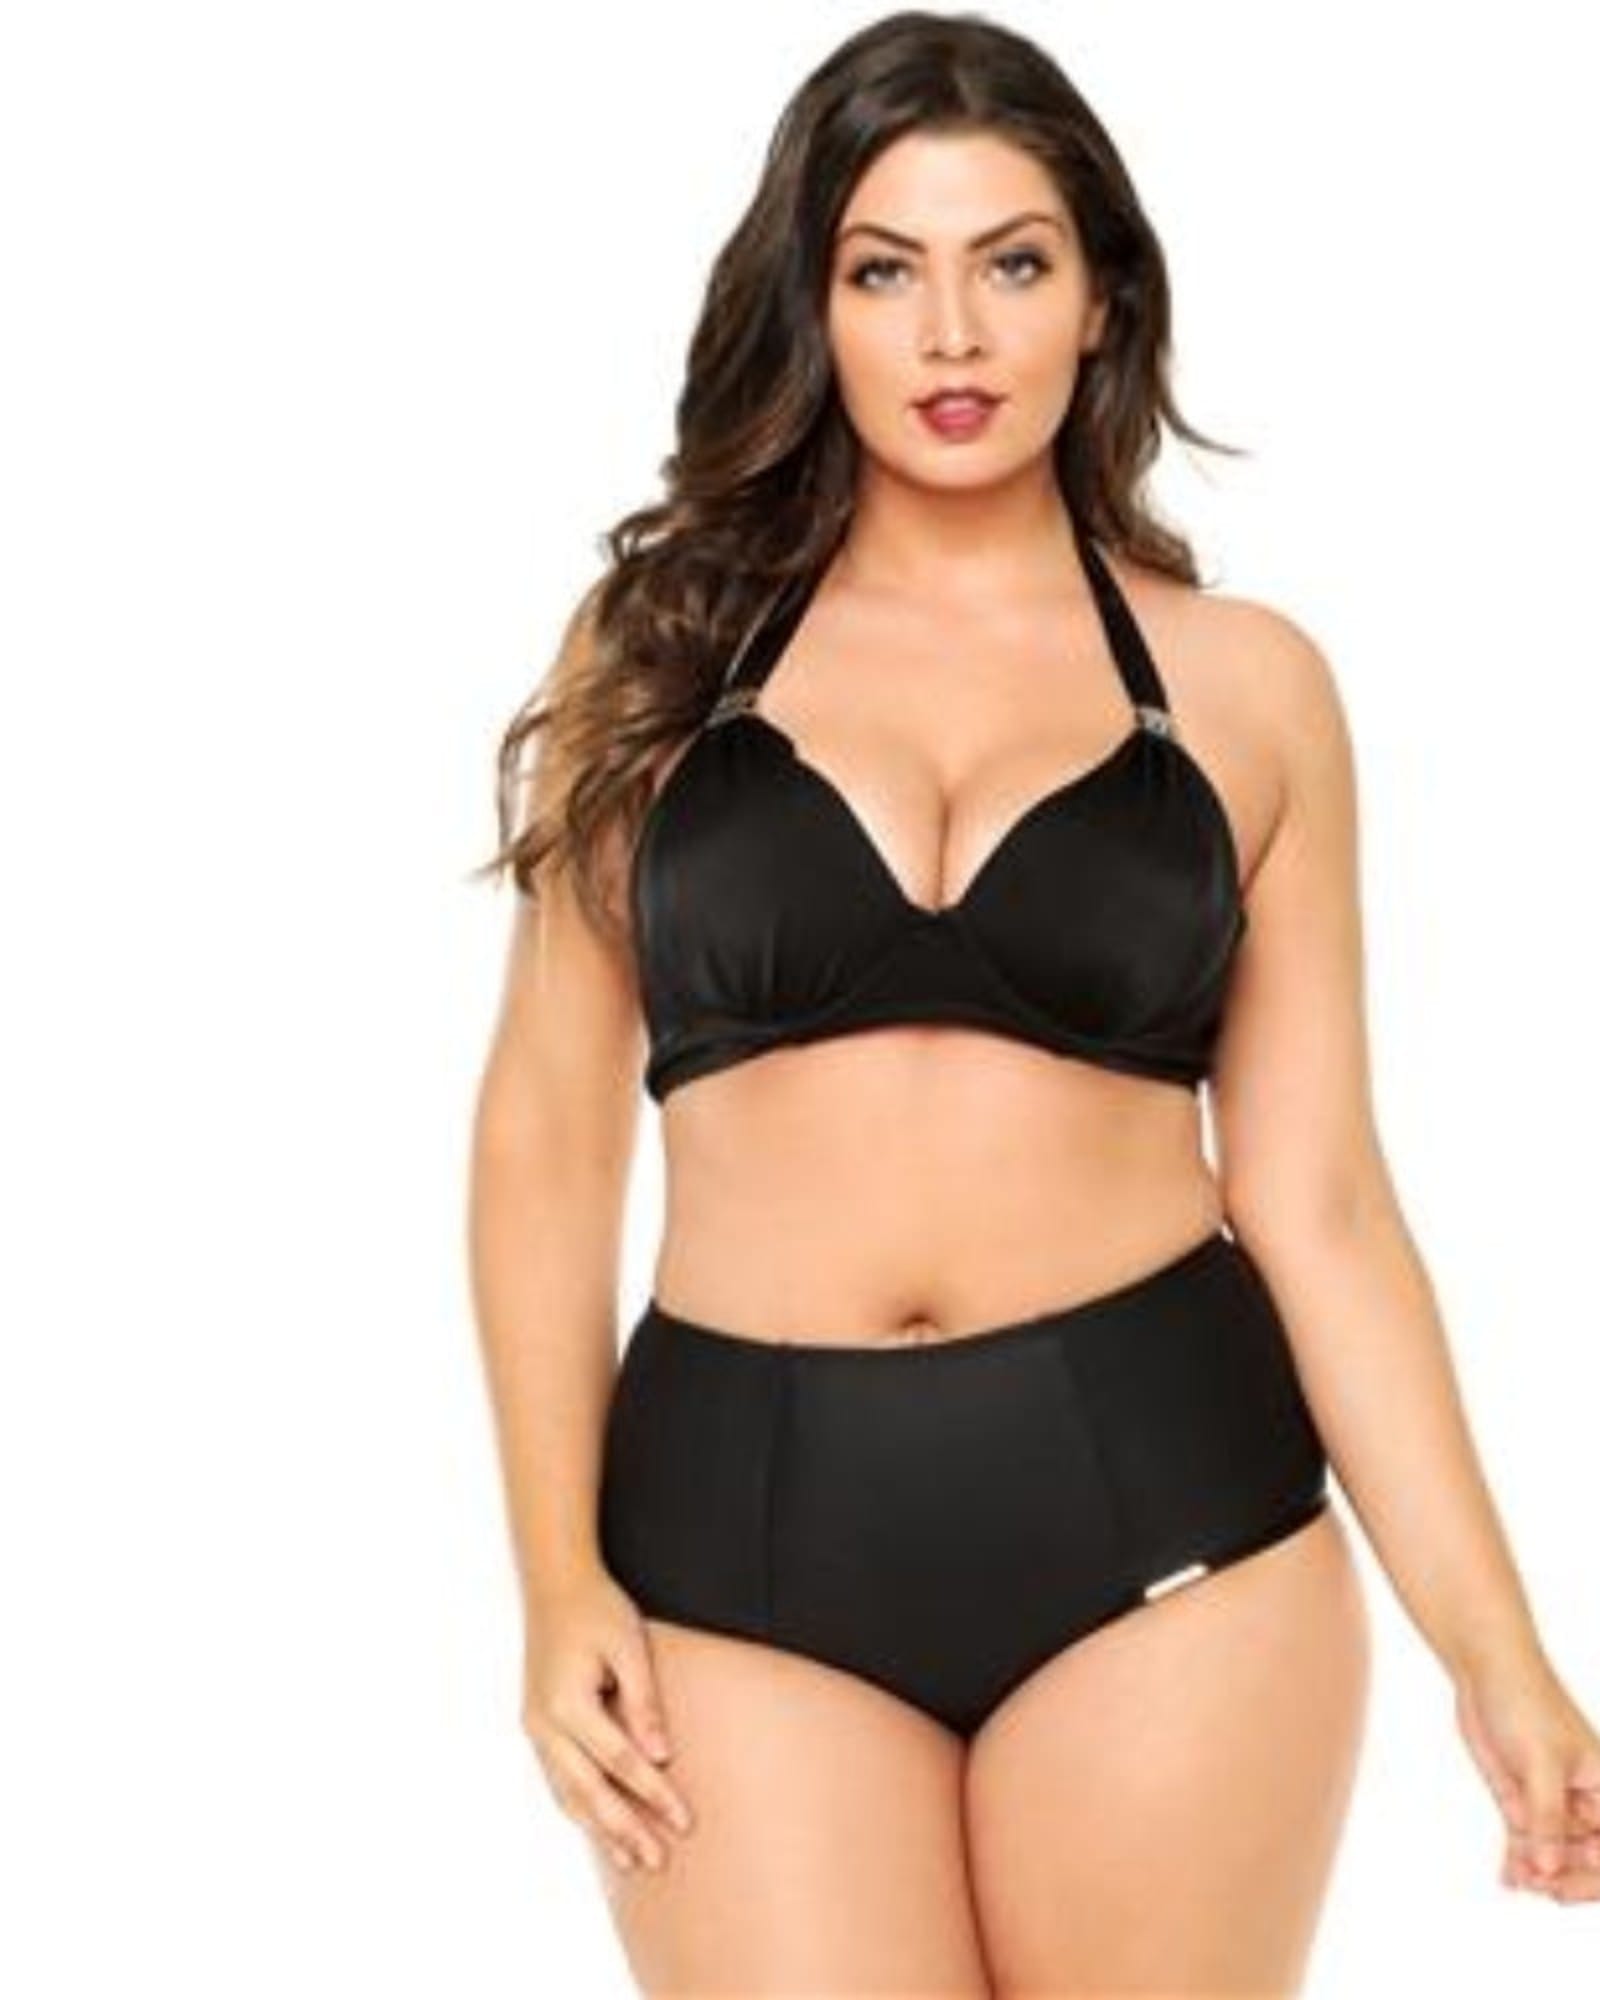 Bikini Top With Padded Cups And Metal Detailing | Black